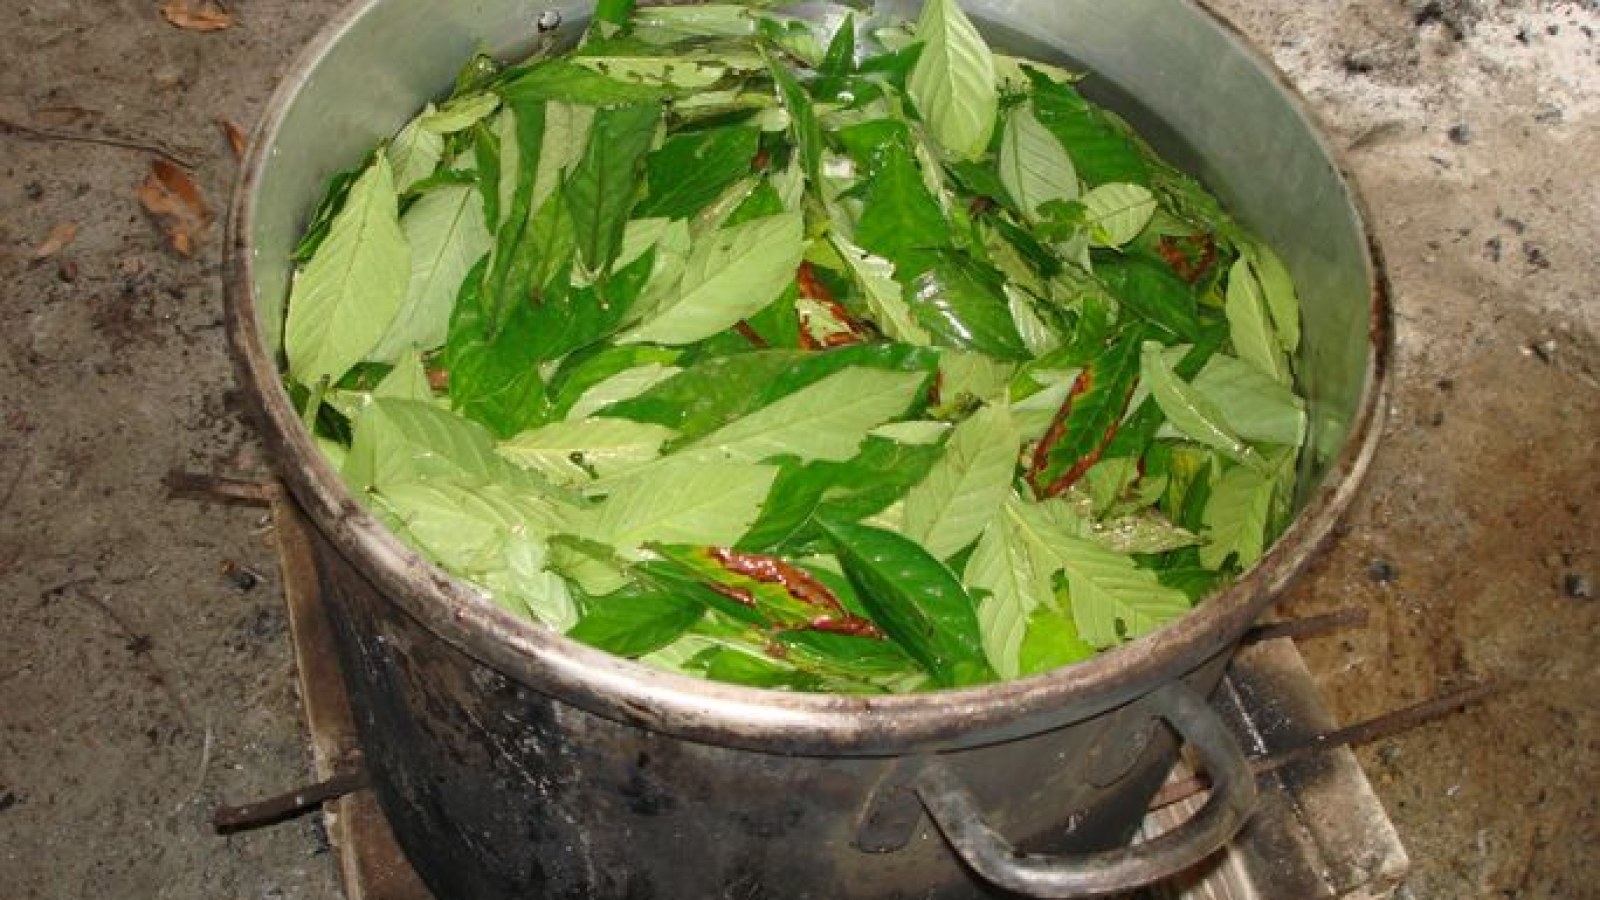 ayahuasca-leaves-in-the-pot-684.jpg